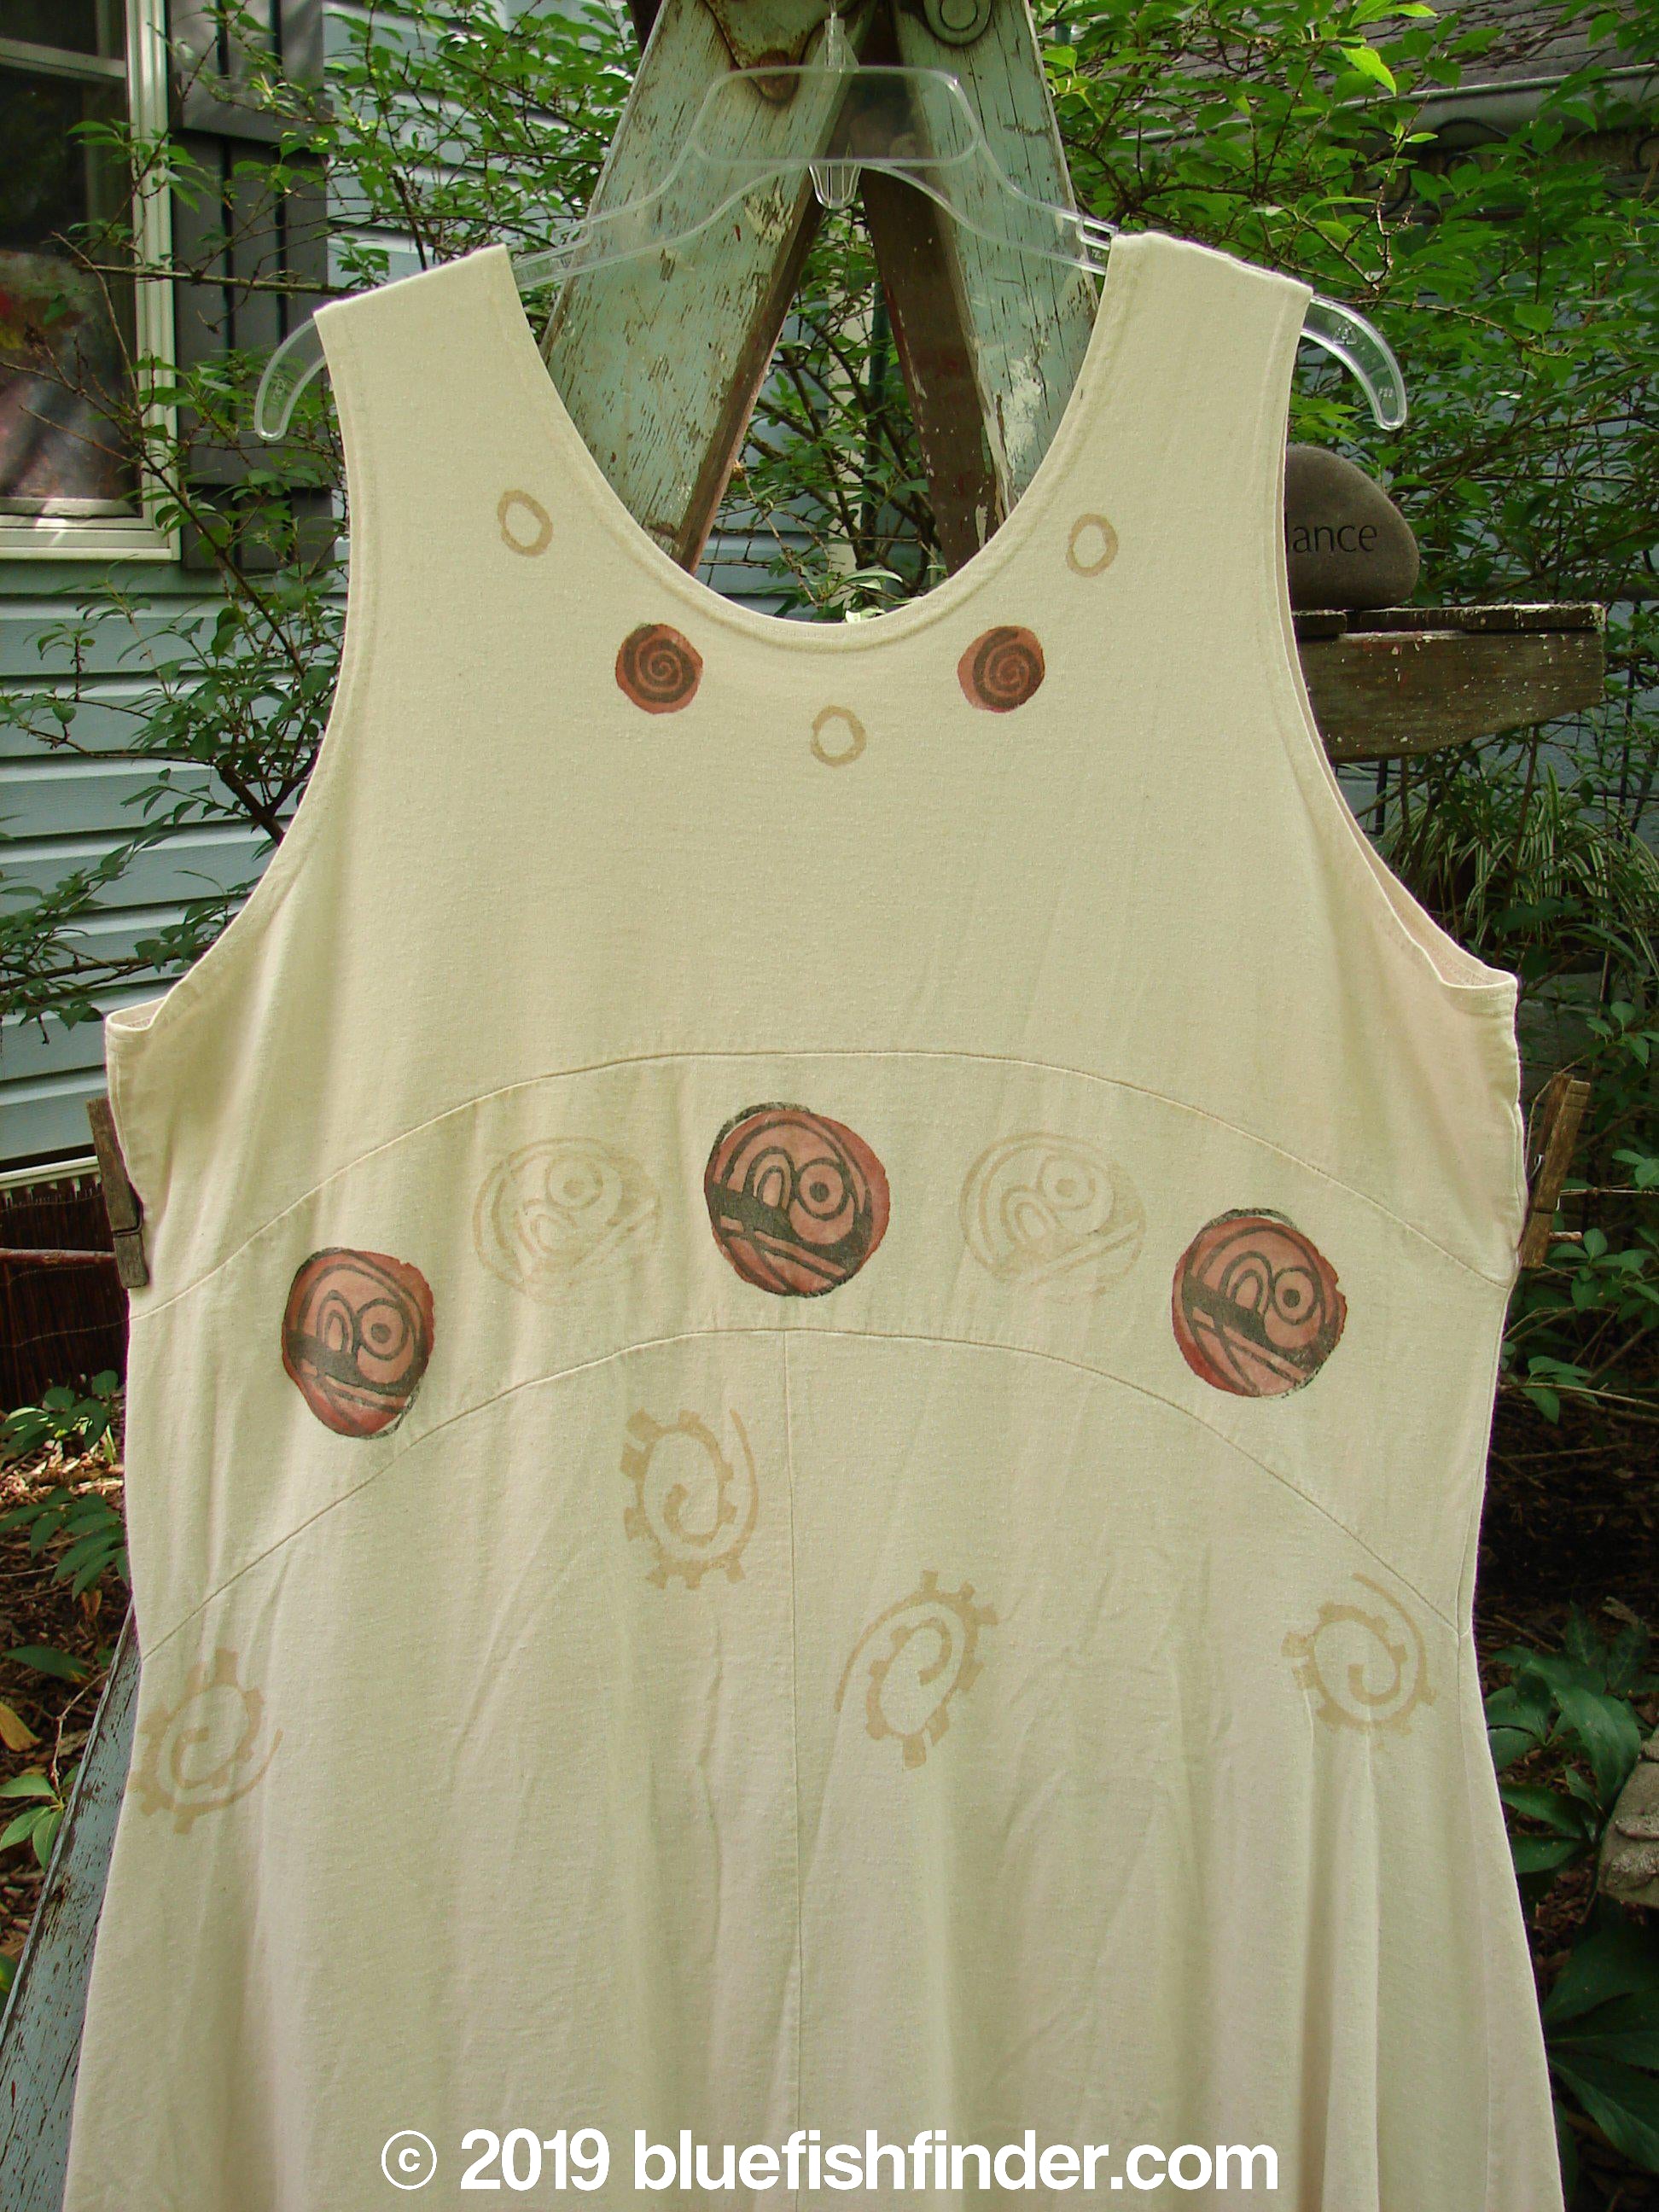 1995 Zelda Jumper Dress Abstract Champagne Size 2: A white dress with brown circles, featuring a deeper scooped neckline and an A-line shape.